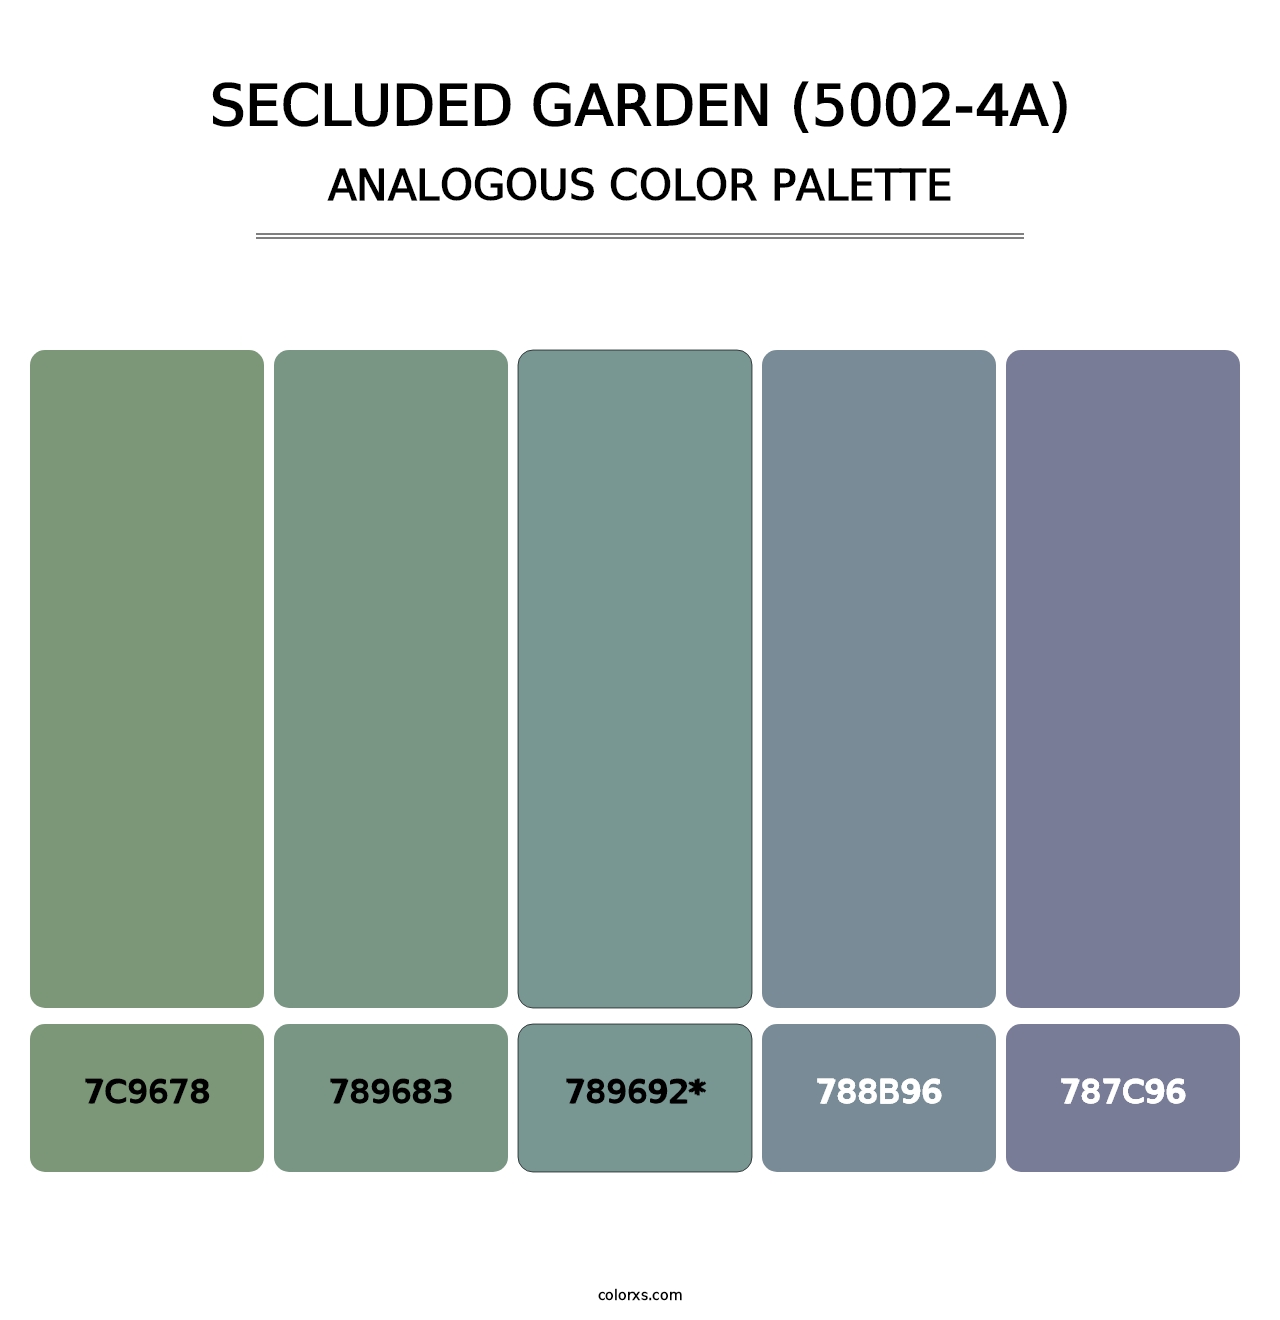 Secluded Garden (5002-4A) - Analogous Color Palette